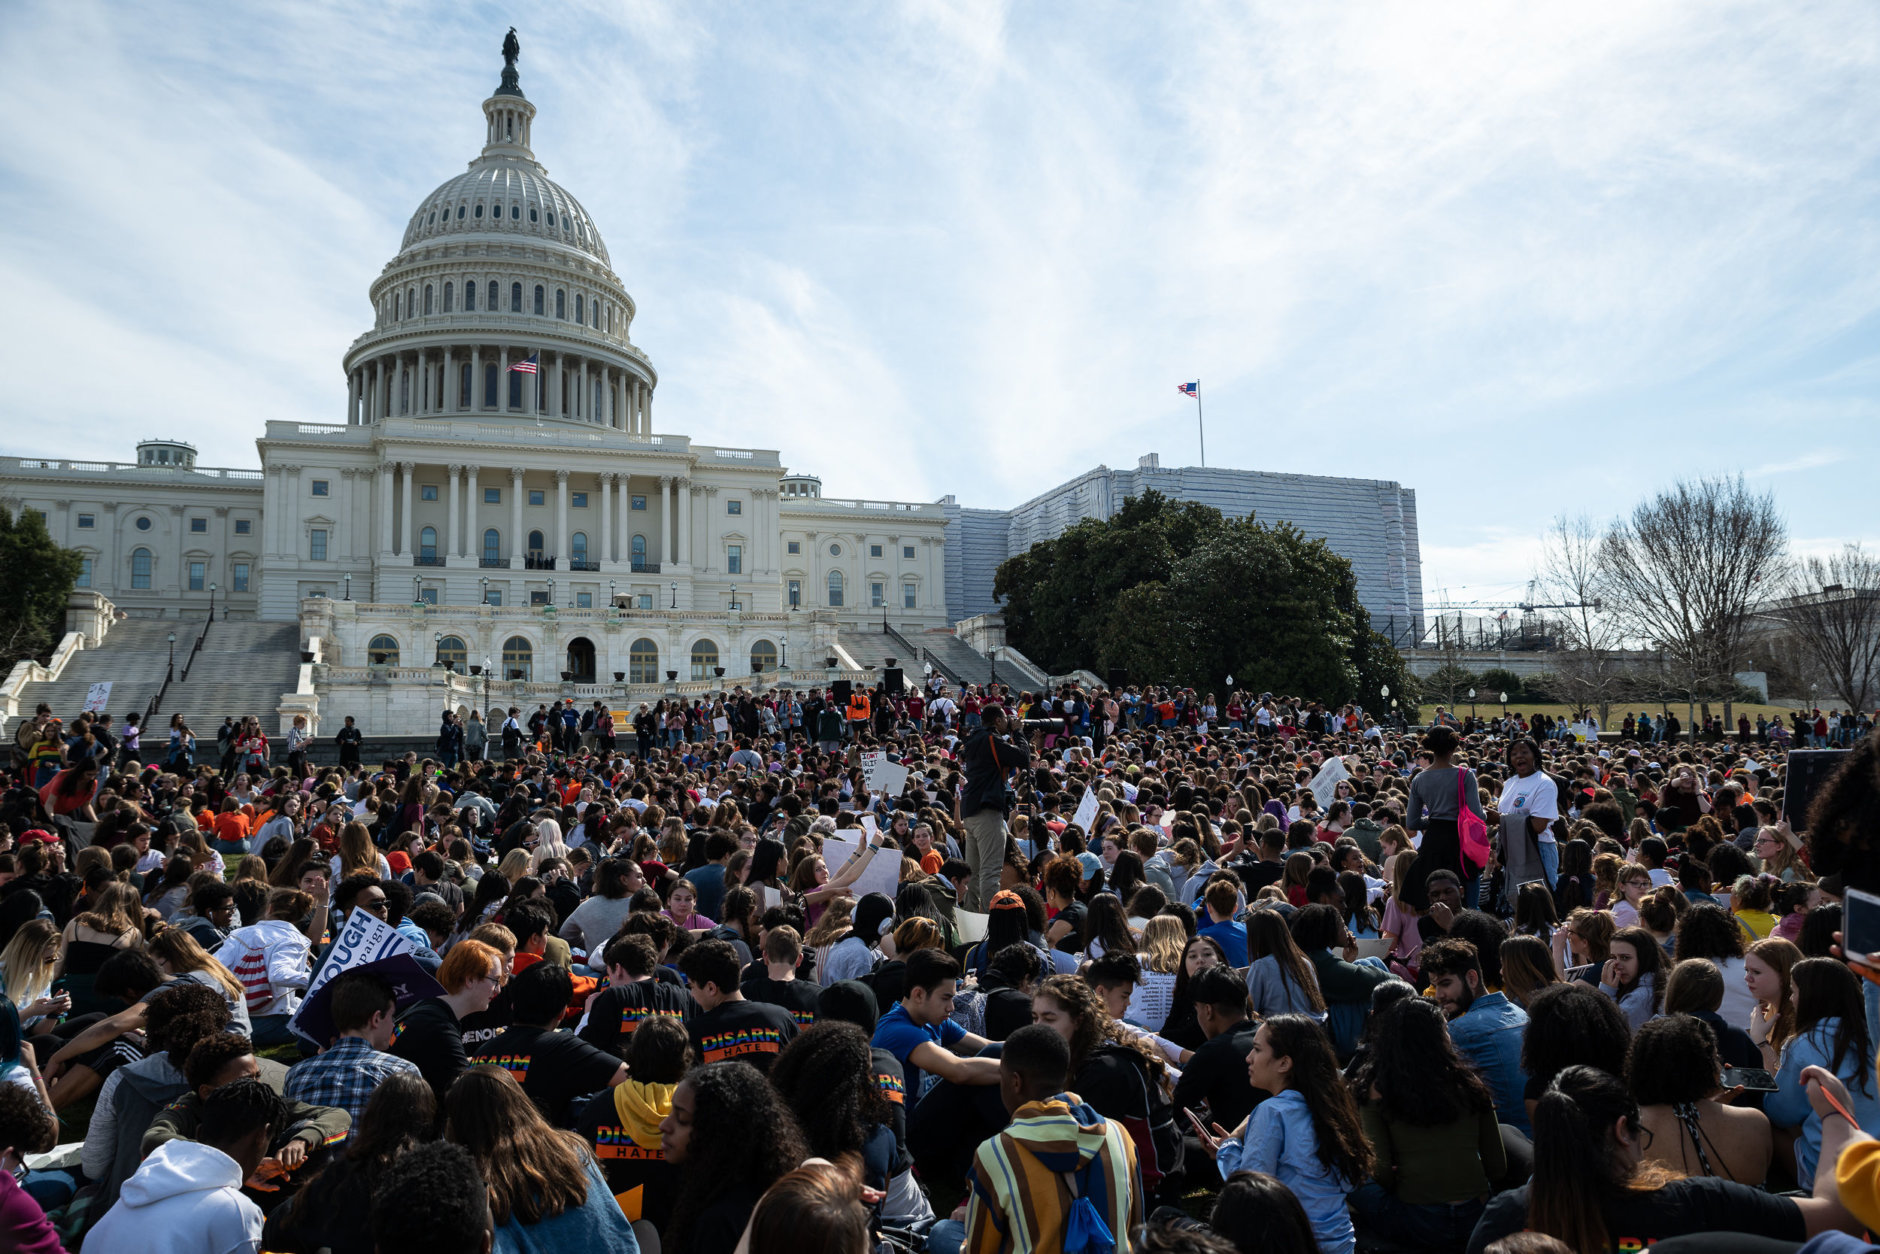 Once at the Capitol, students sat and listened intently as members of Congress and fellow student activists took turns advocating for background check legislation and supporing the protest on the stage. (WTOP/Alejandro Alvarez)